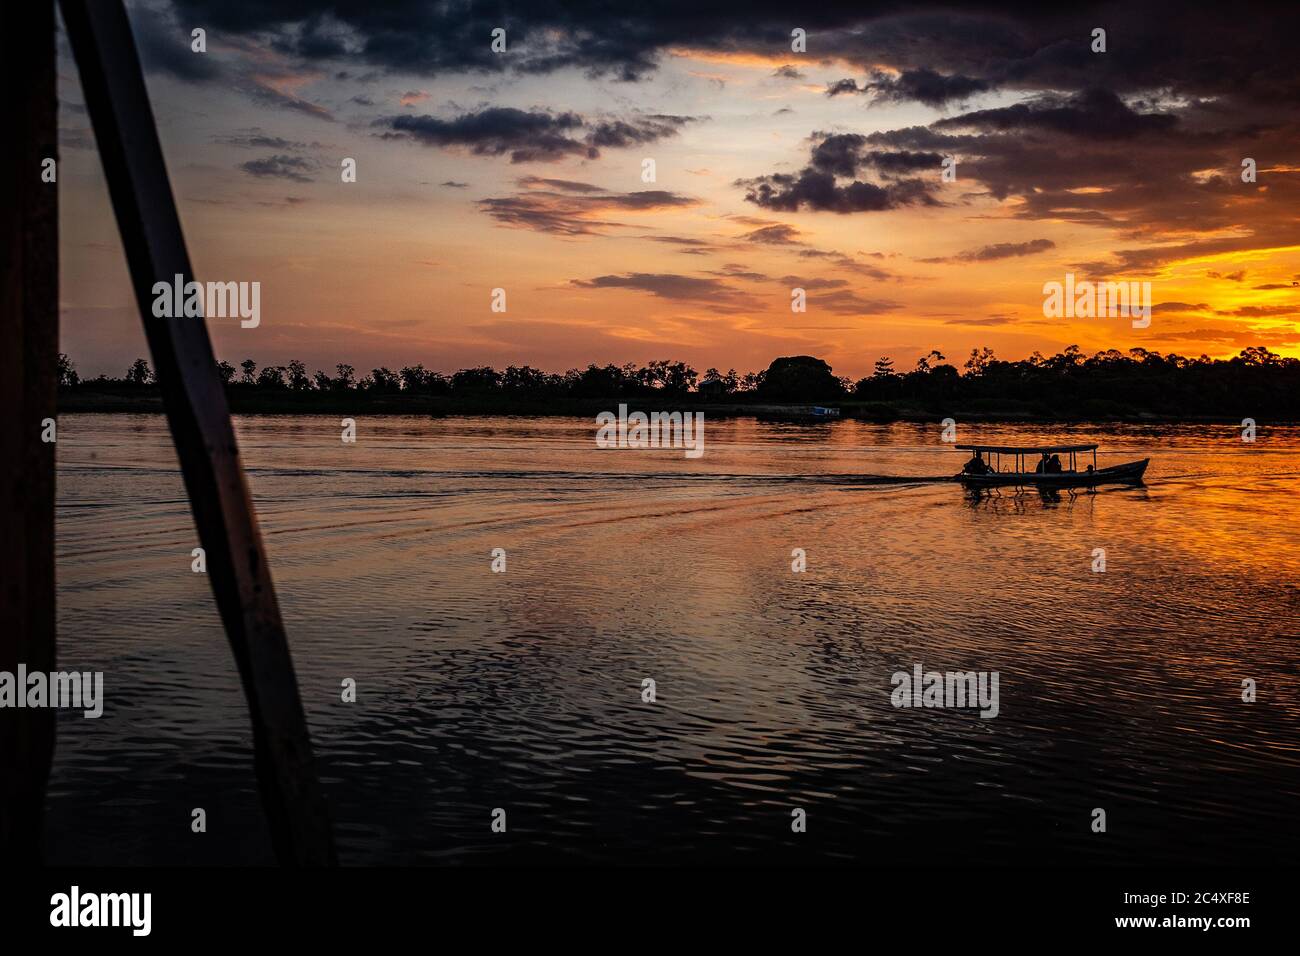 Sunset at an amazon river, State of Pará, Brazil. Stock Photo